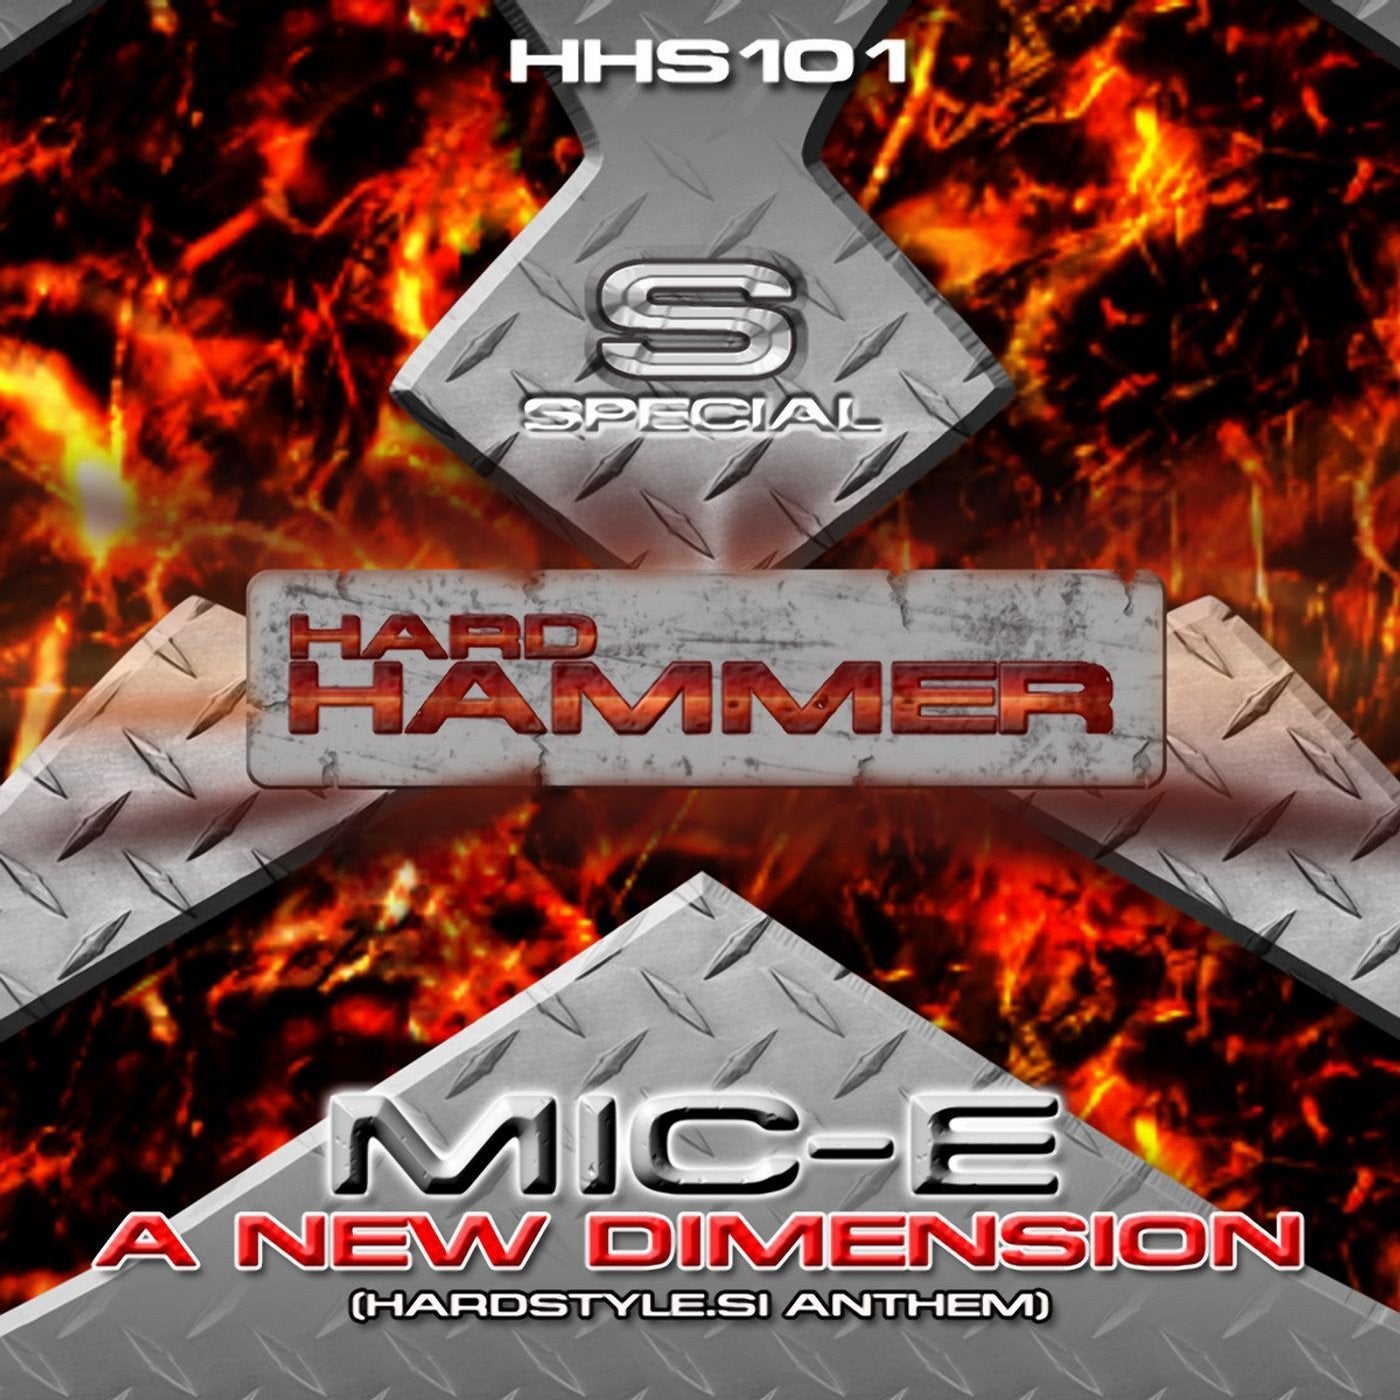 A New Dimension (Hardstyle.si Anthem)